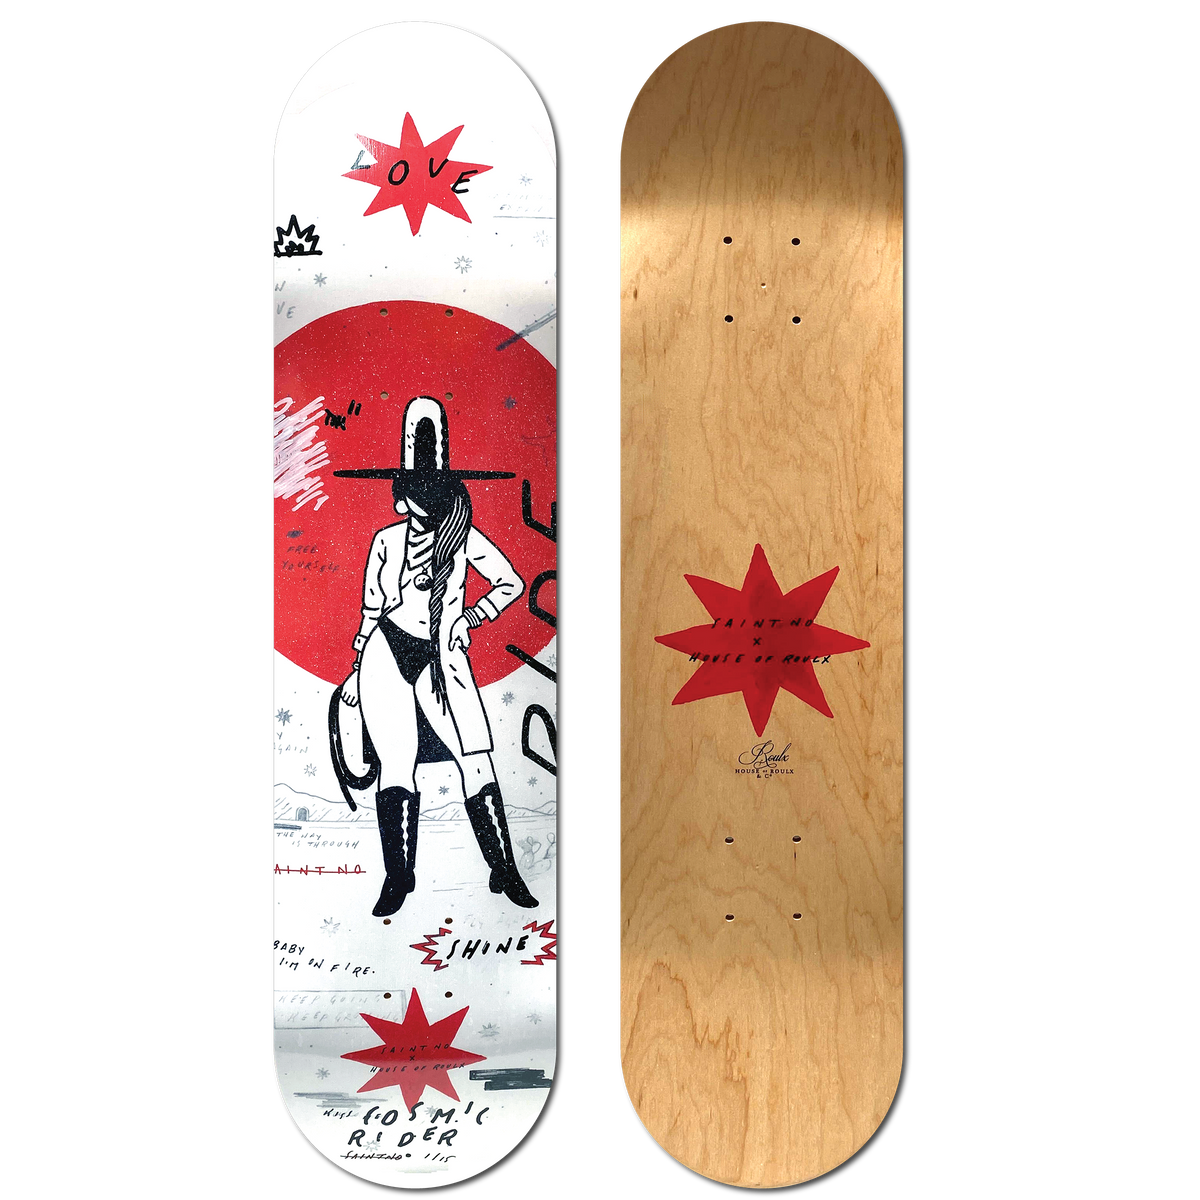 SAINT NO &quot;Cosmic Rider: Side A&quot; - Skate Deck, Hand-Embellished Edition of 15